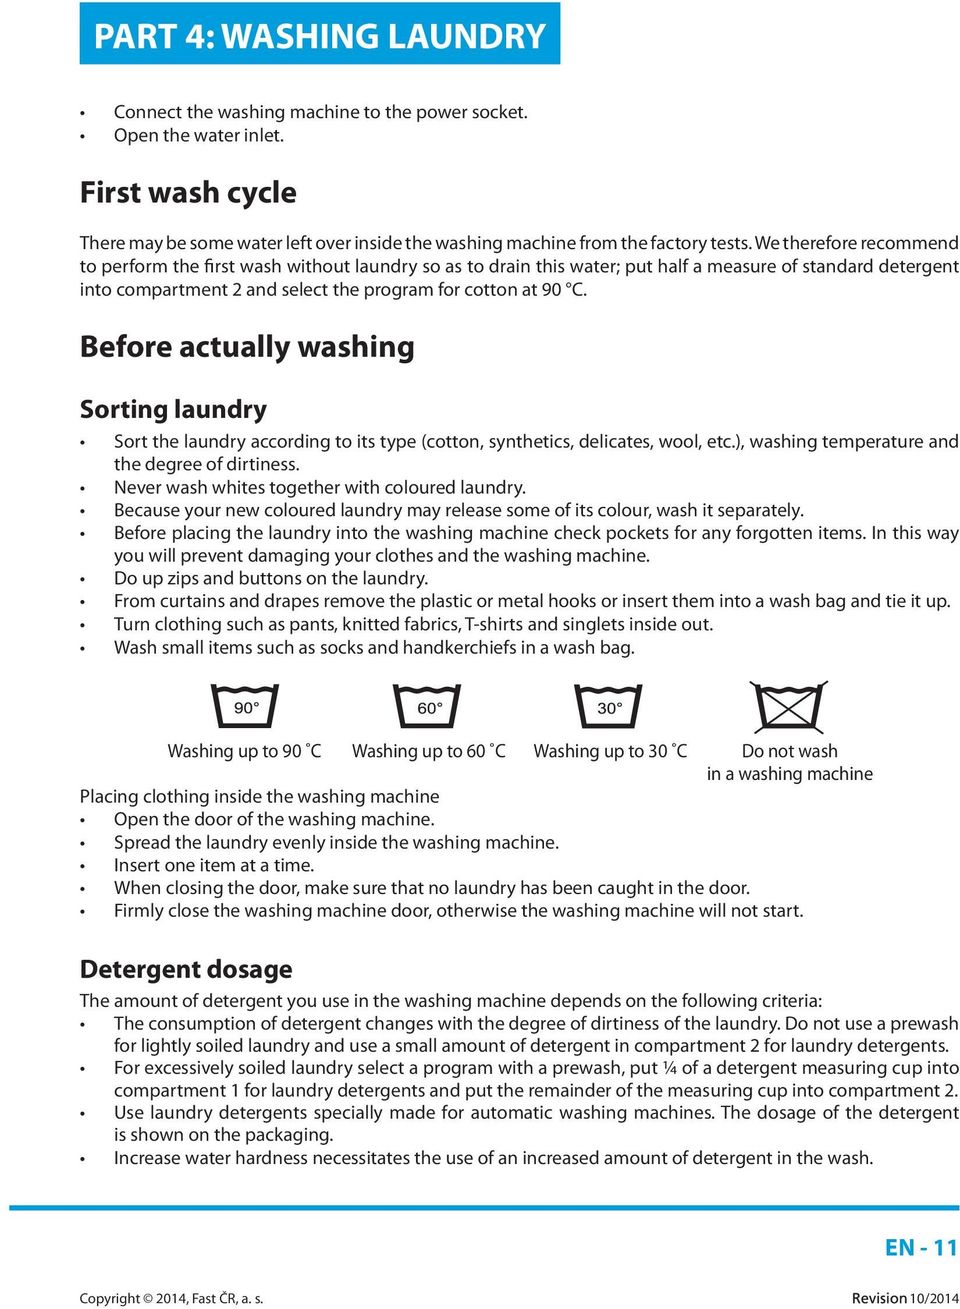 Before actually washing Sorting laundry Sort the laundry according to its type (cotton, synthetics, delicates, wool, etc.), washing temperature and the degree of dirtiness.